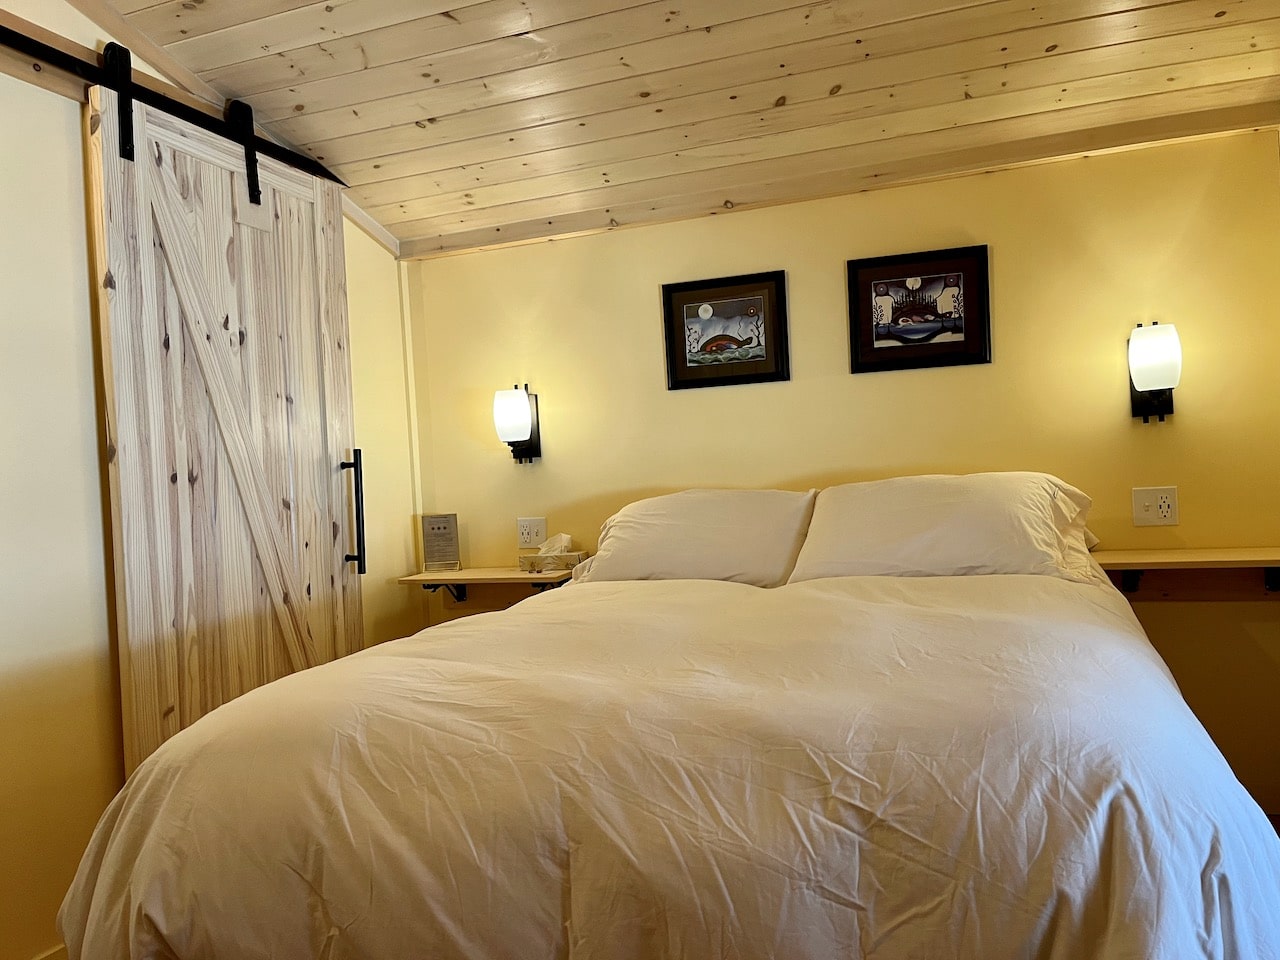 Northern Edge Algonquin's accommodations at Dreamer's Hill include cozy beds and a shared living room.